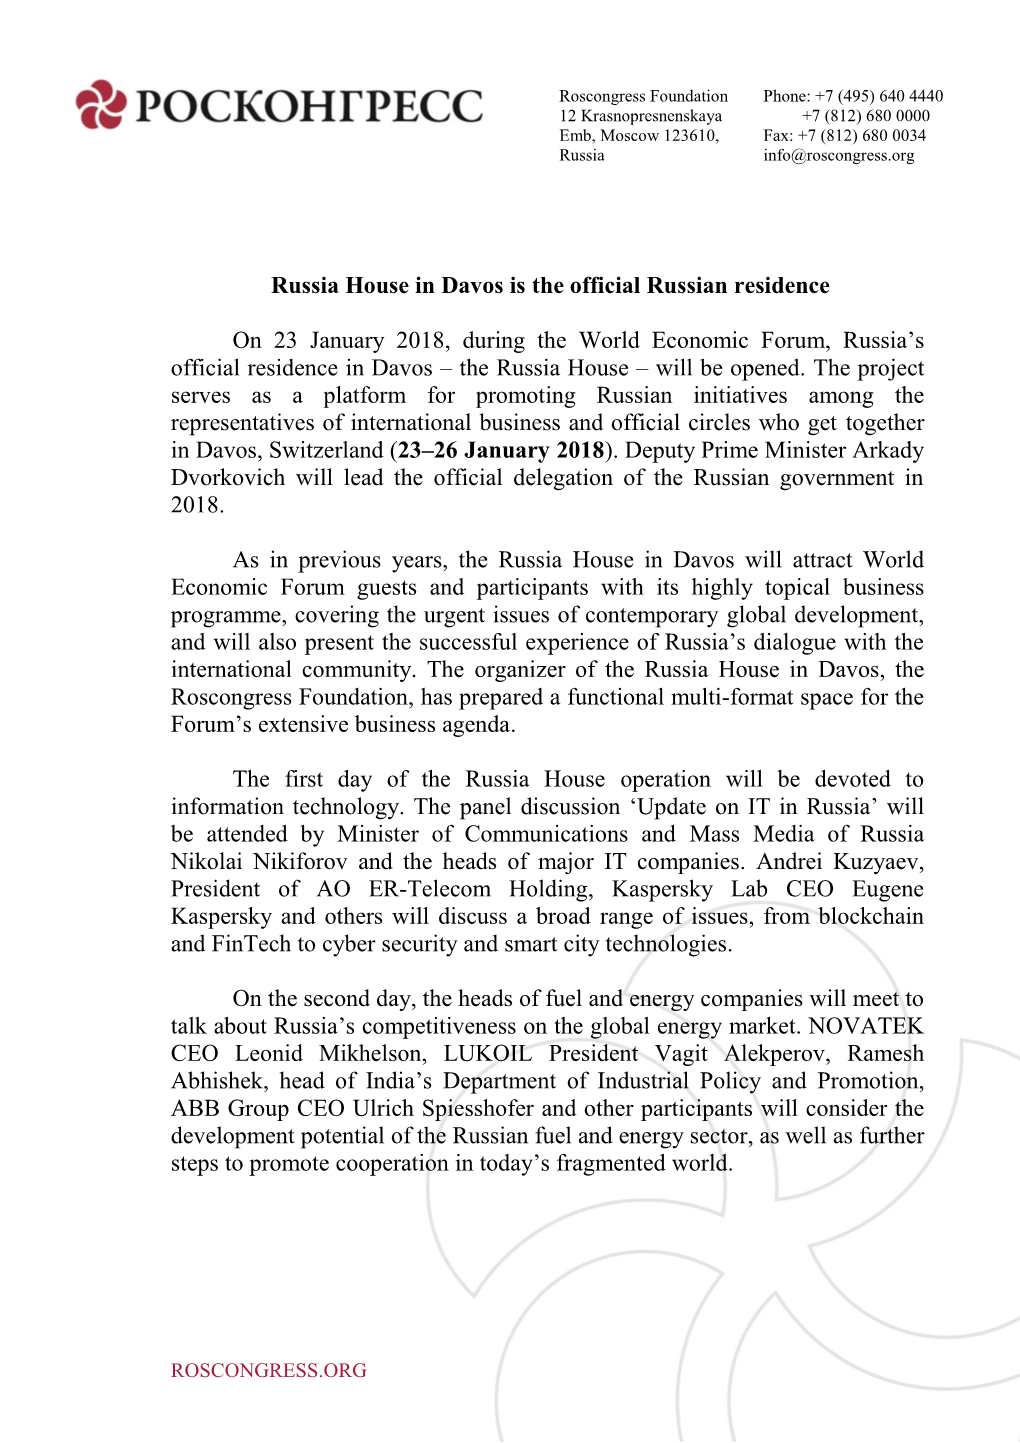 Russia House in Davos Is the Official Russian Residence on 23 January